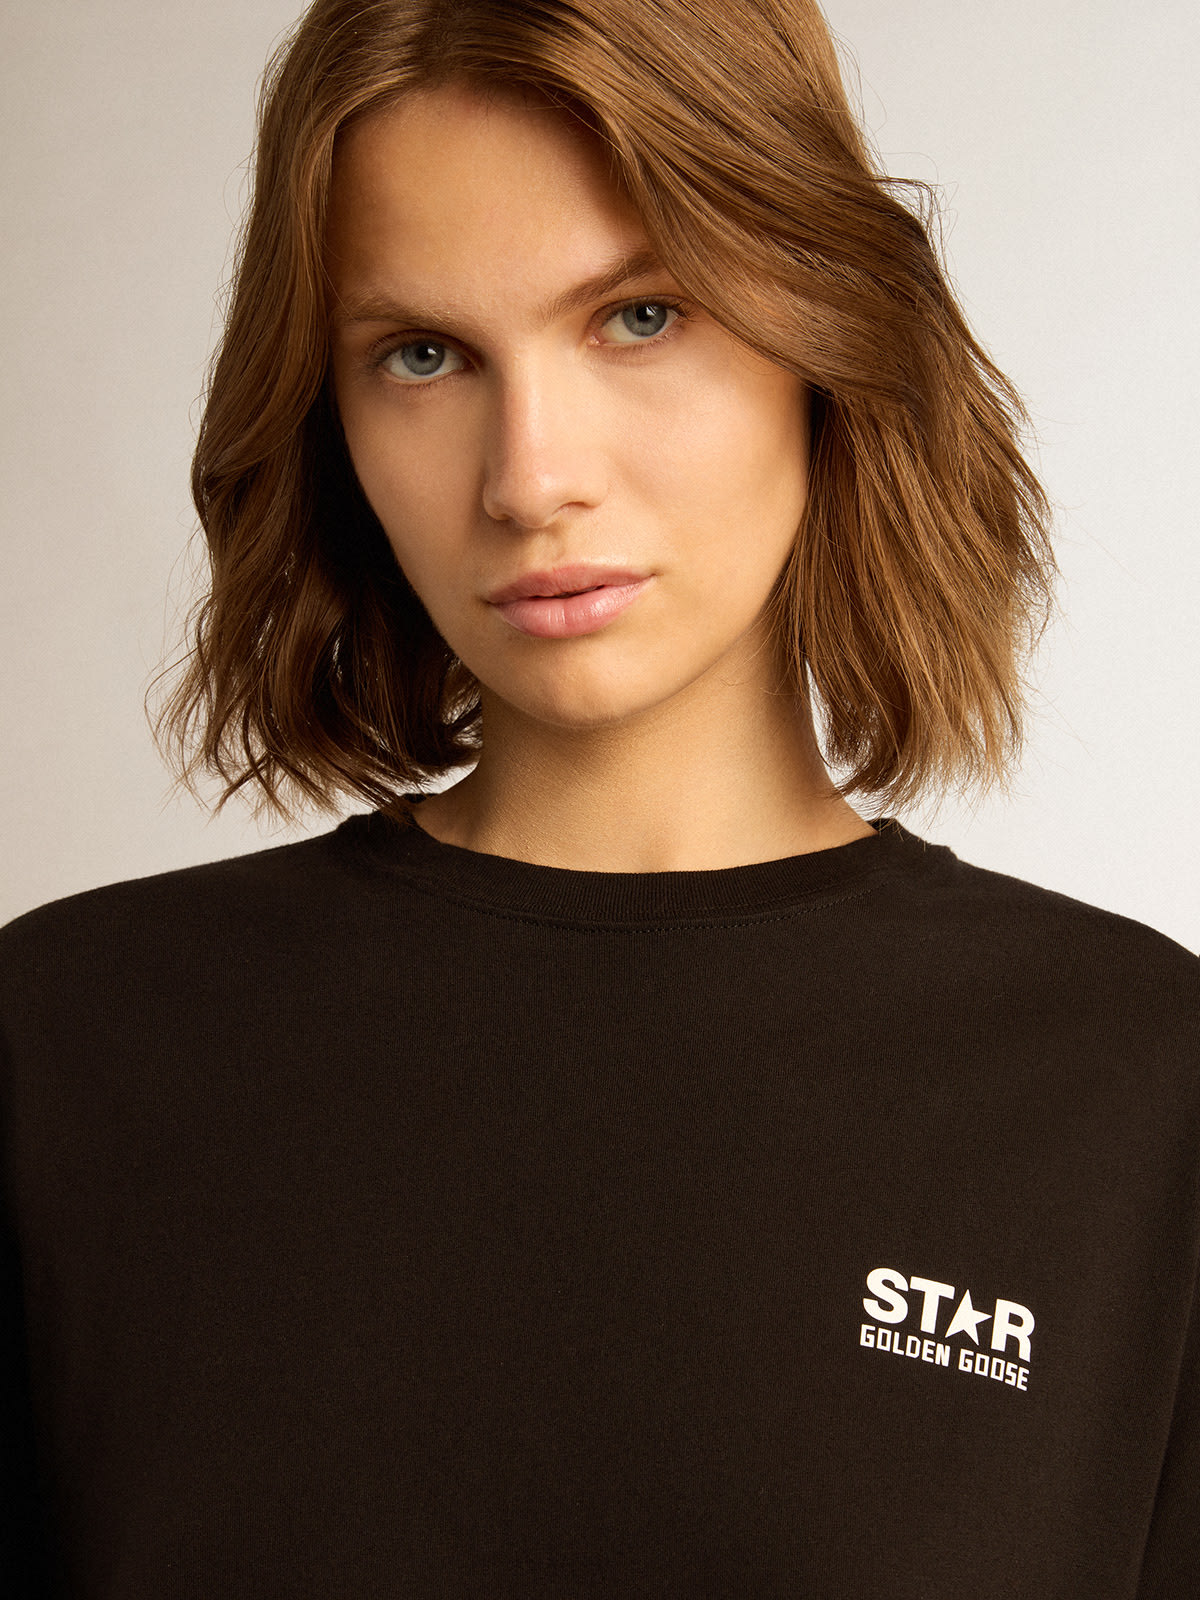 Golden Goose - Black Star Collection T-shirt with contrasting white logo and star in 